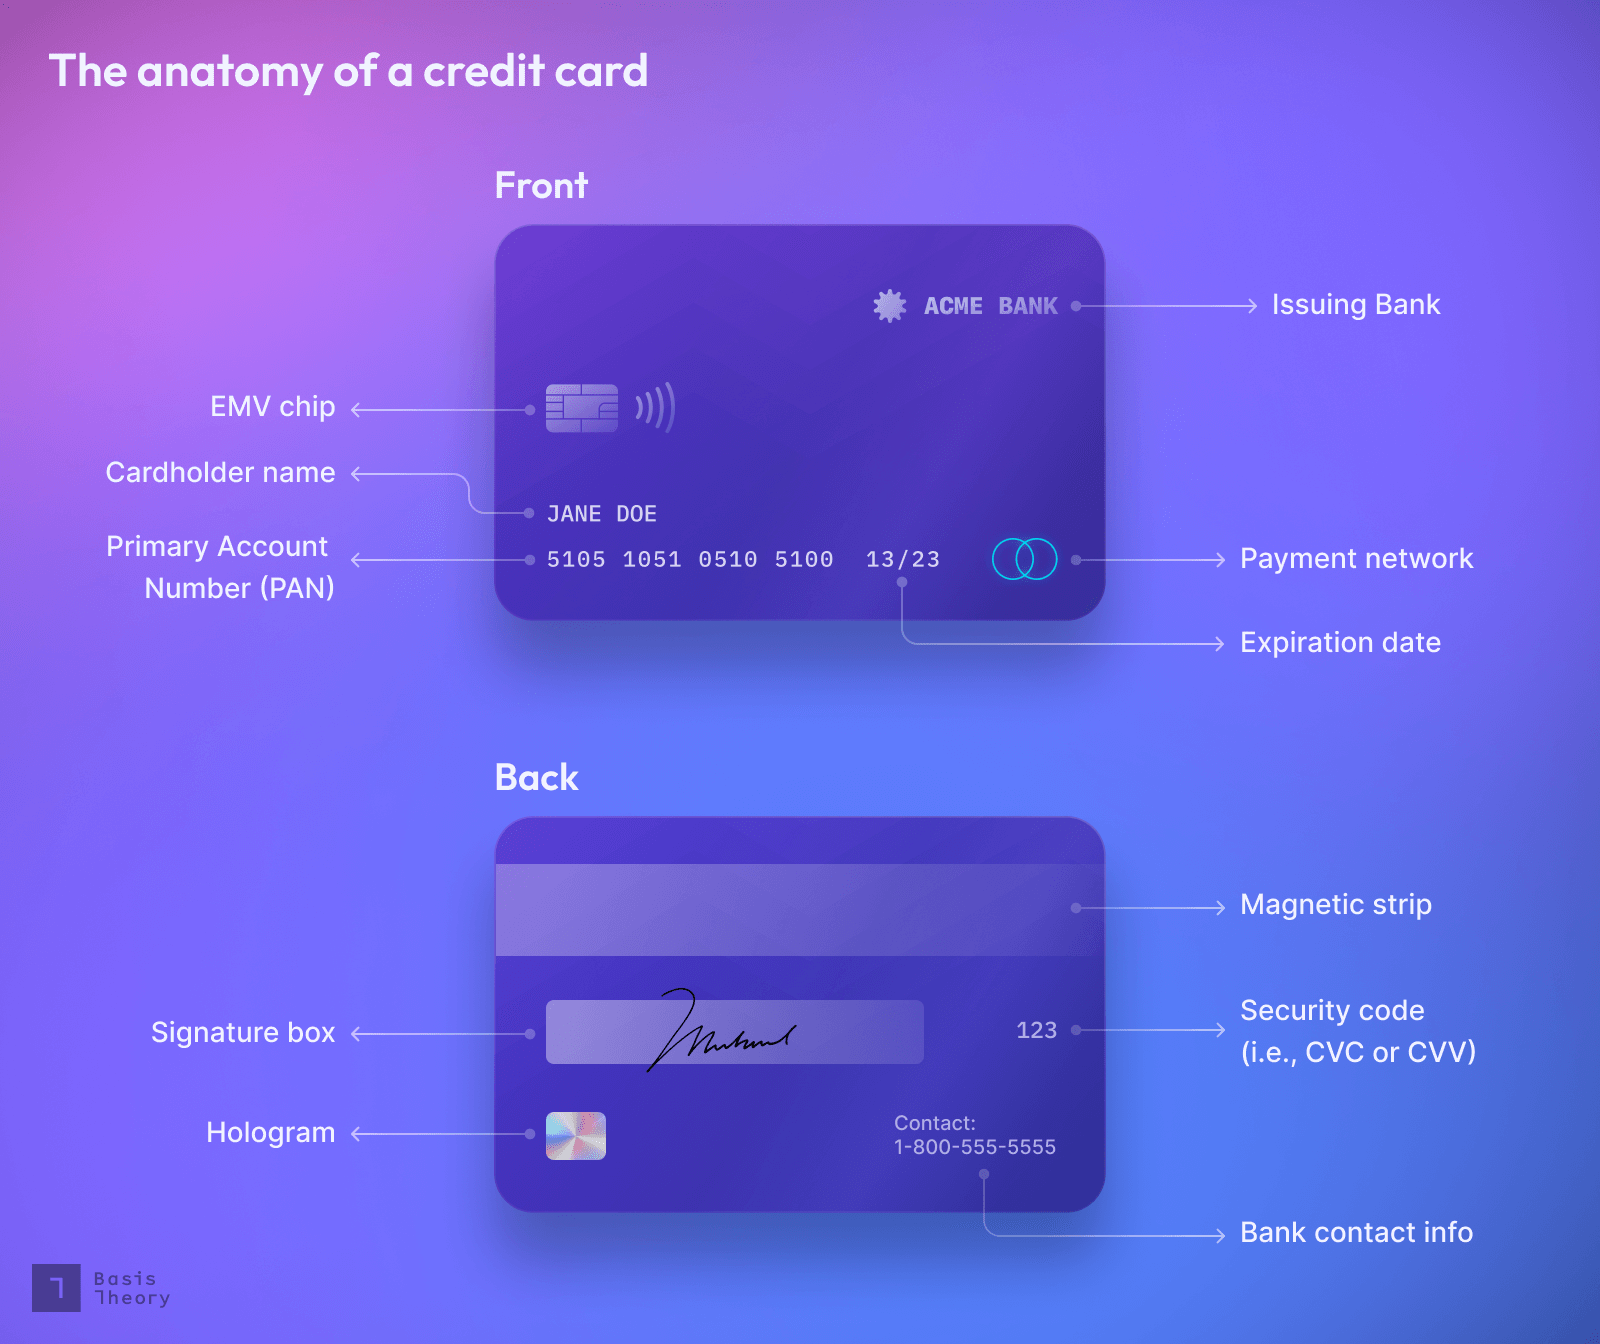 The front and back of credit cards contain key cardholder data (CHD) and sensitive authentication data (SAD). Each serve one or more functions in the routing and verification of payments.